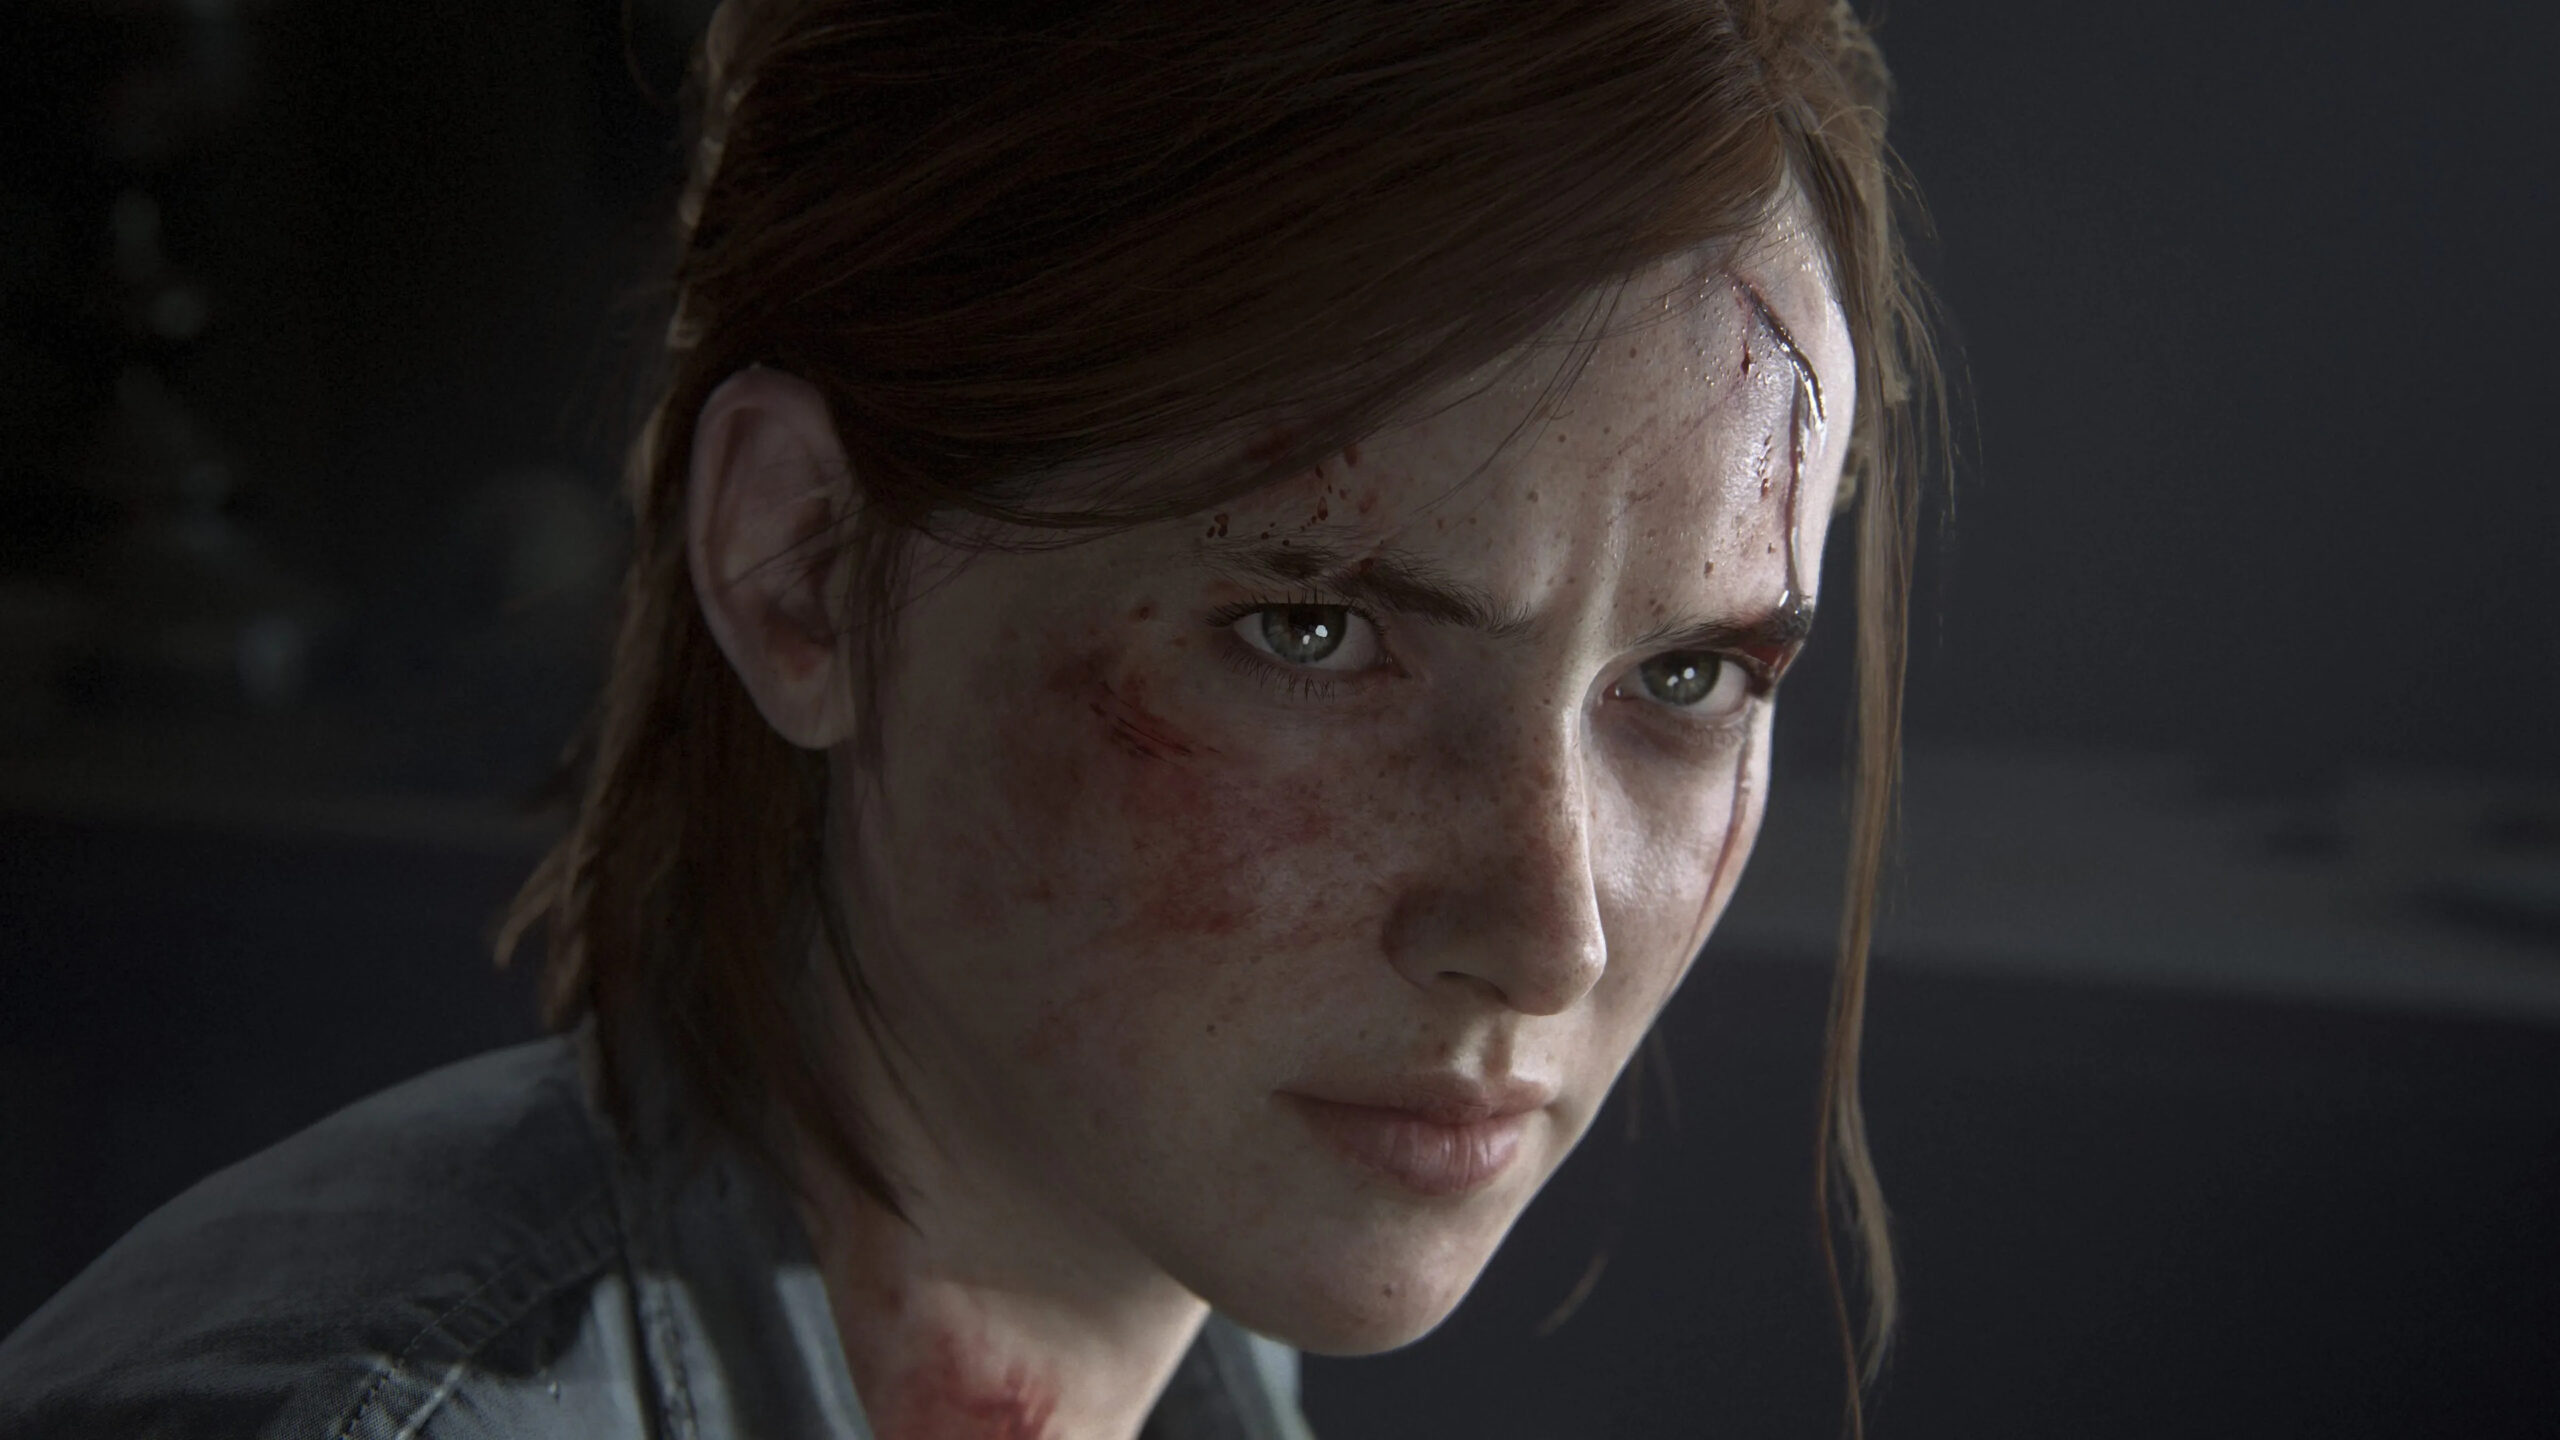 The “everything is political” crowd blasts Last of Us' Neil Druckmann